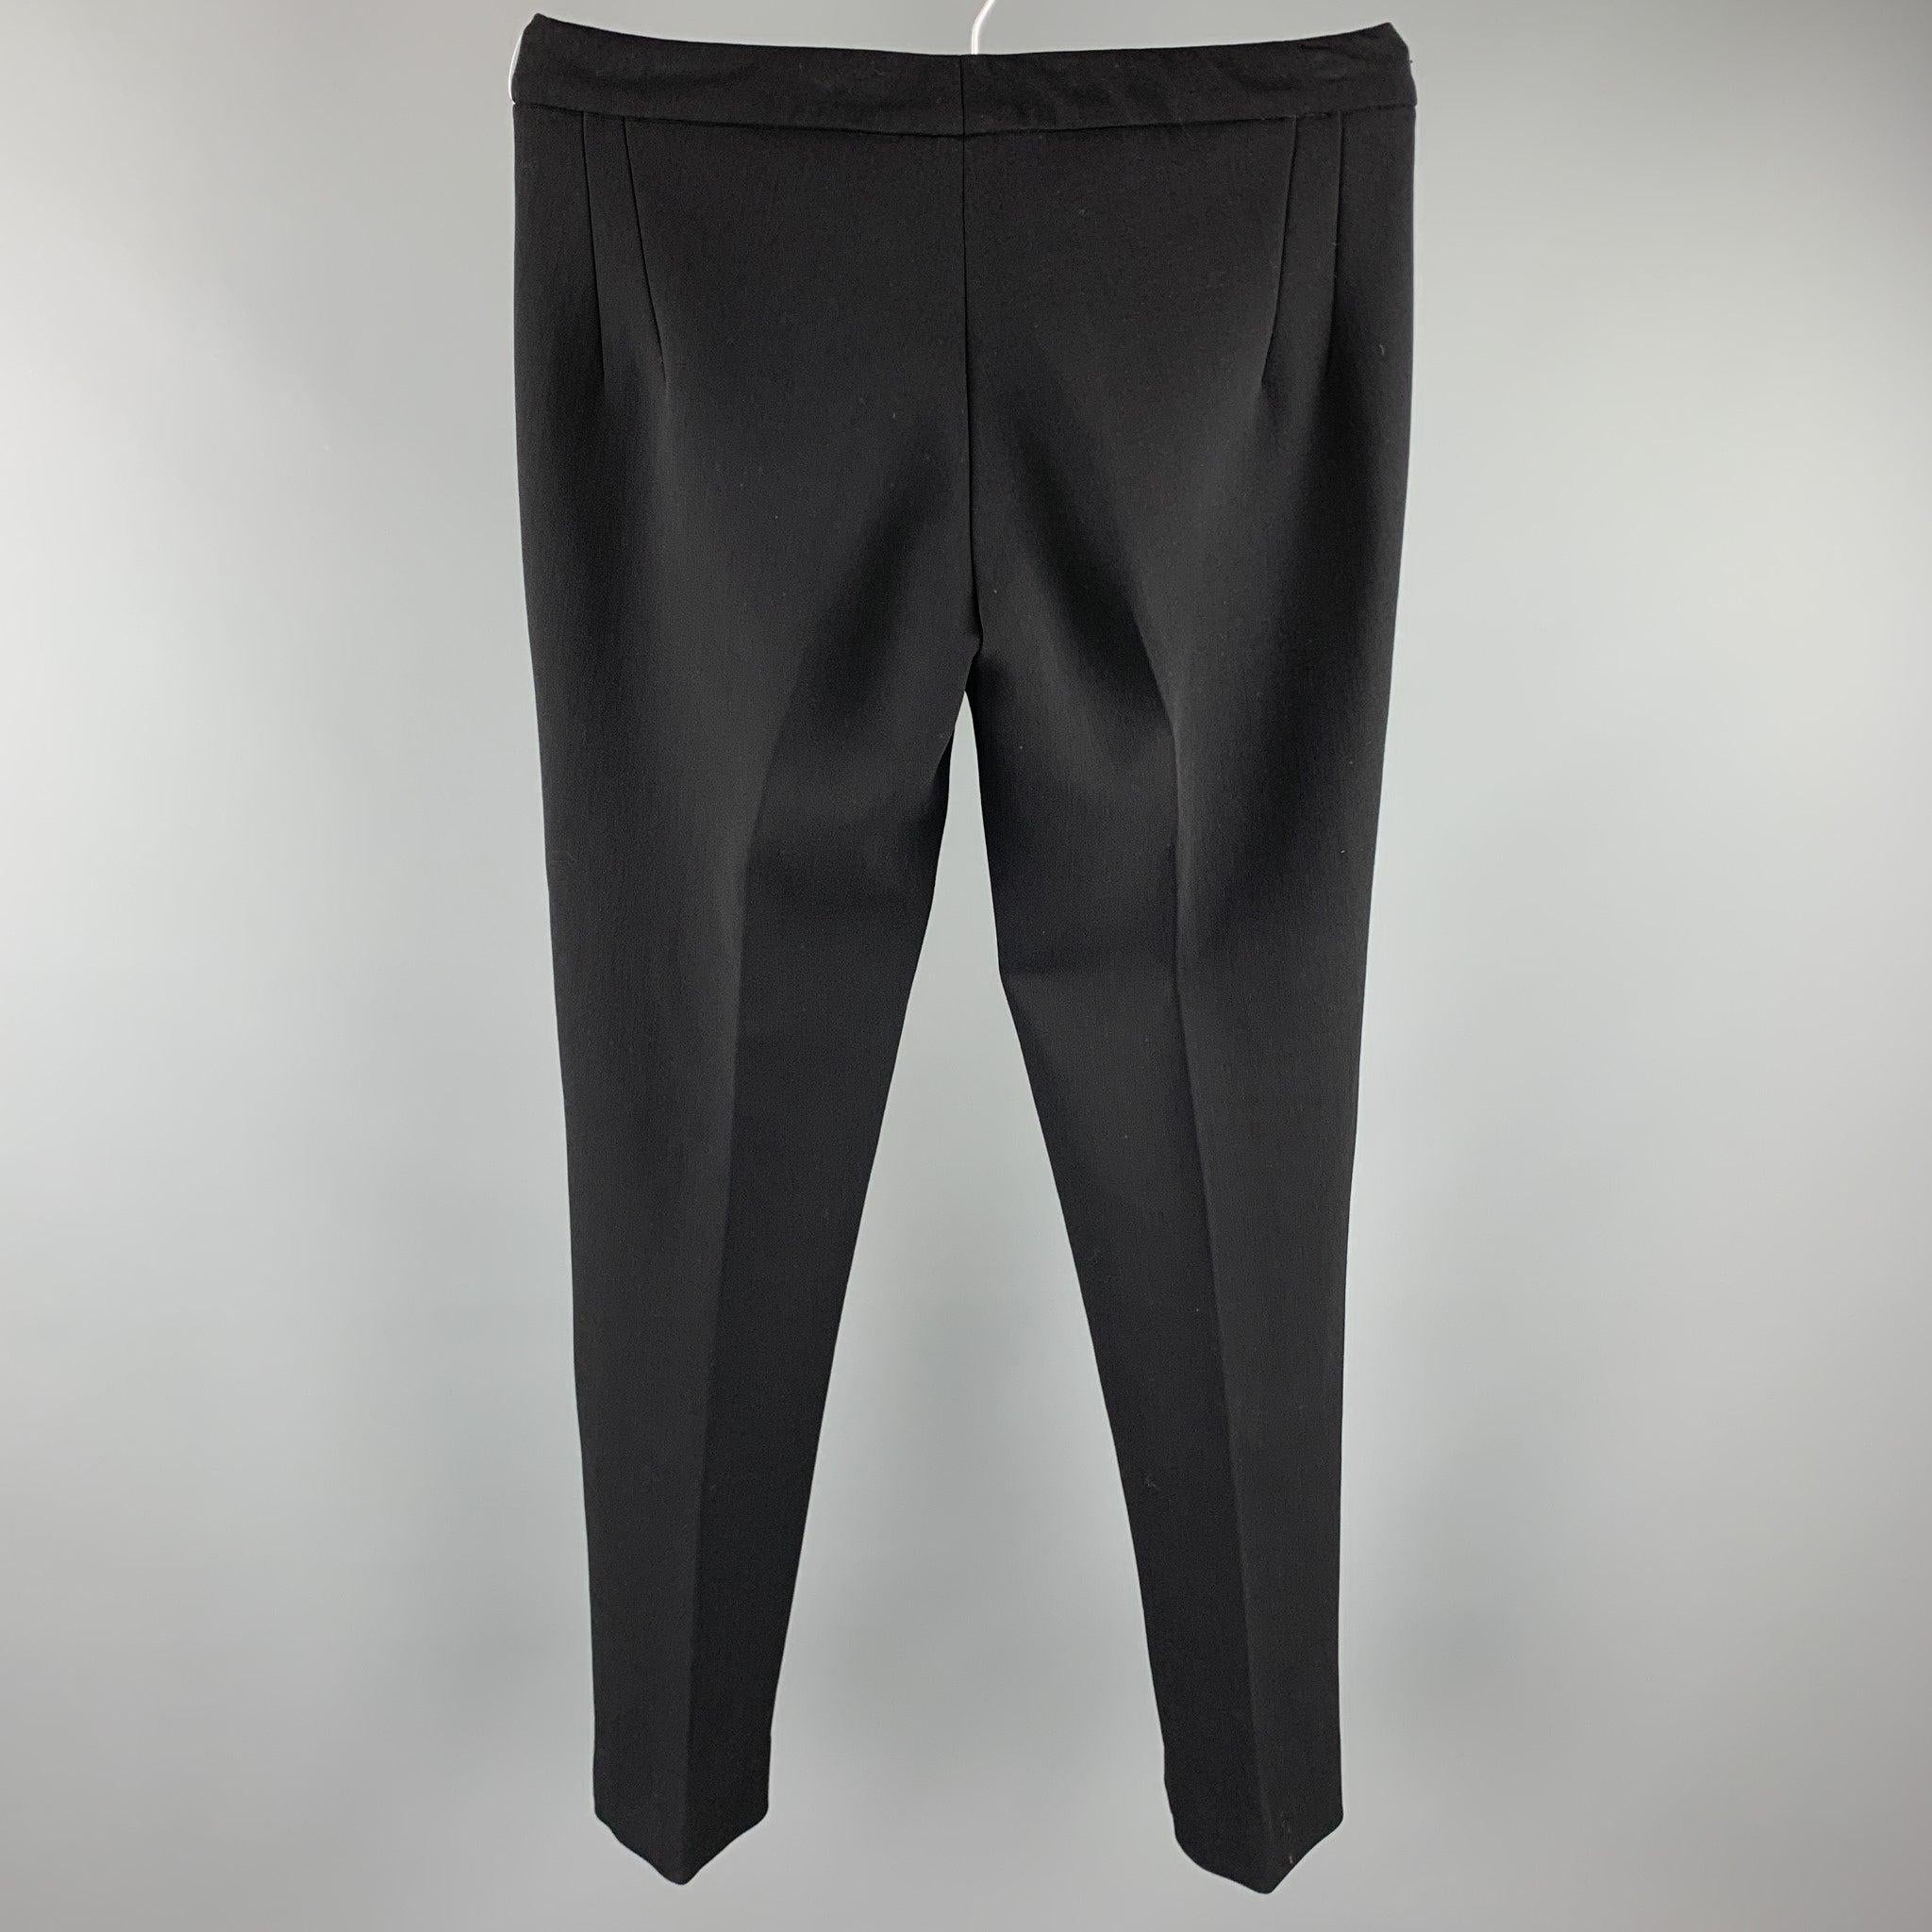 RALPH LAUREN COLLECTION Size 6 Black Straight Leg Dress Pants In Good Condition For Sale In San Francisco, CA